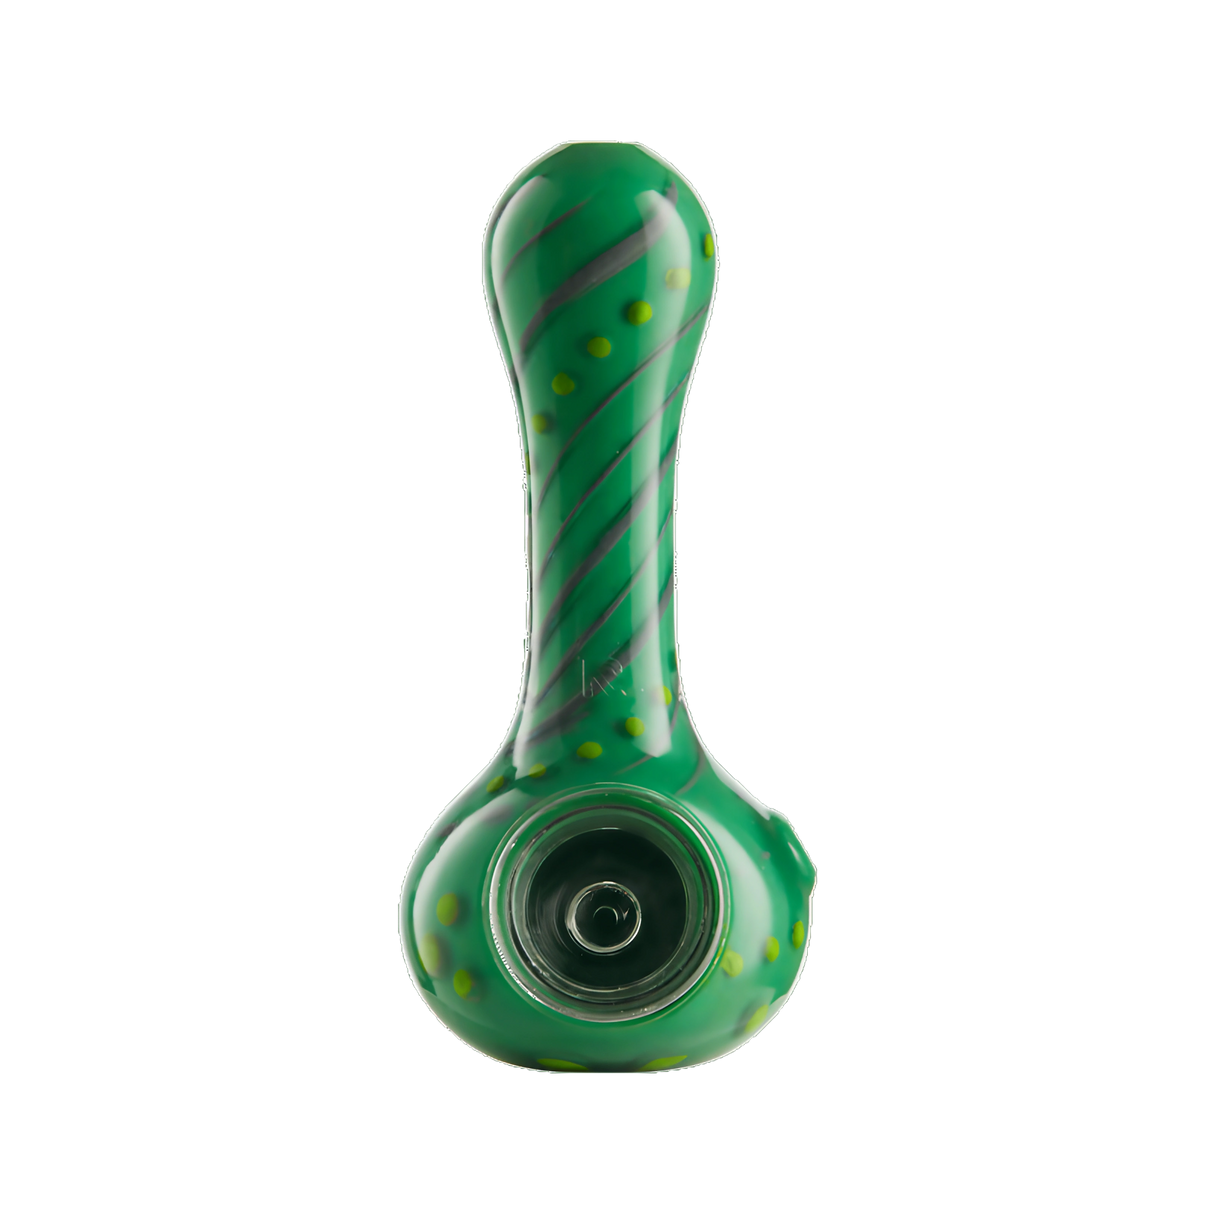 Eyce ORAFLEX Floral Spoon in Grngrygrn variant, durable silicone hand pipe with unique design, front view